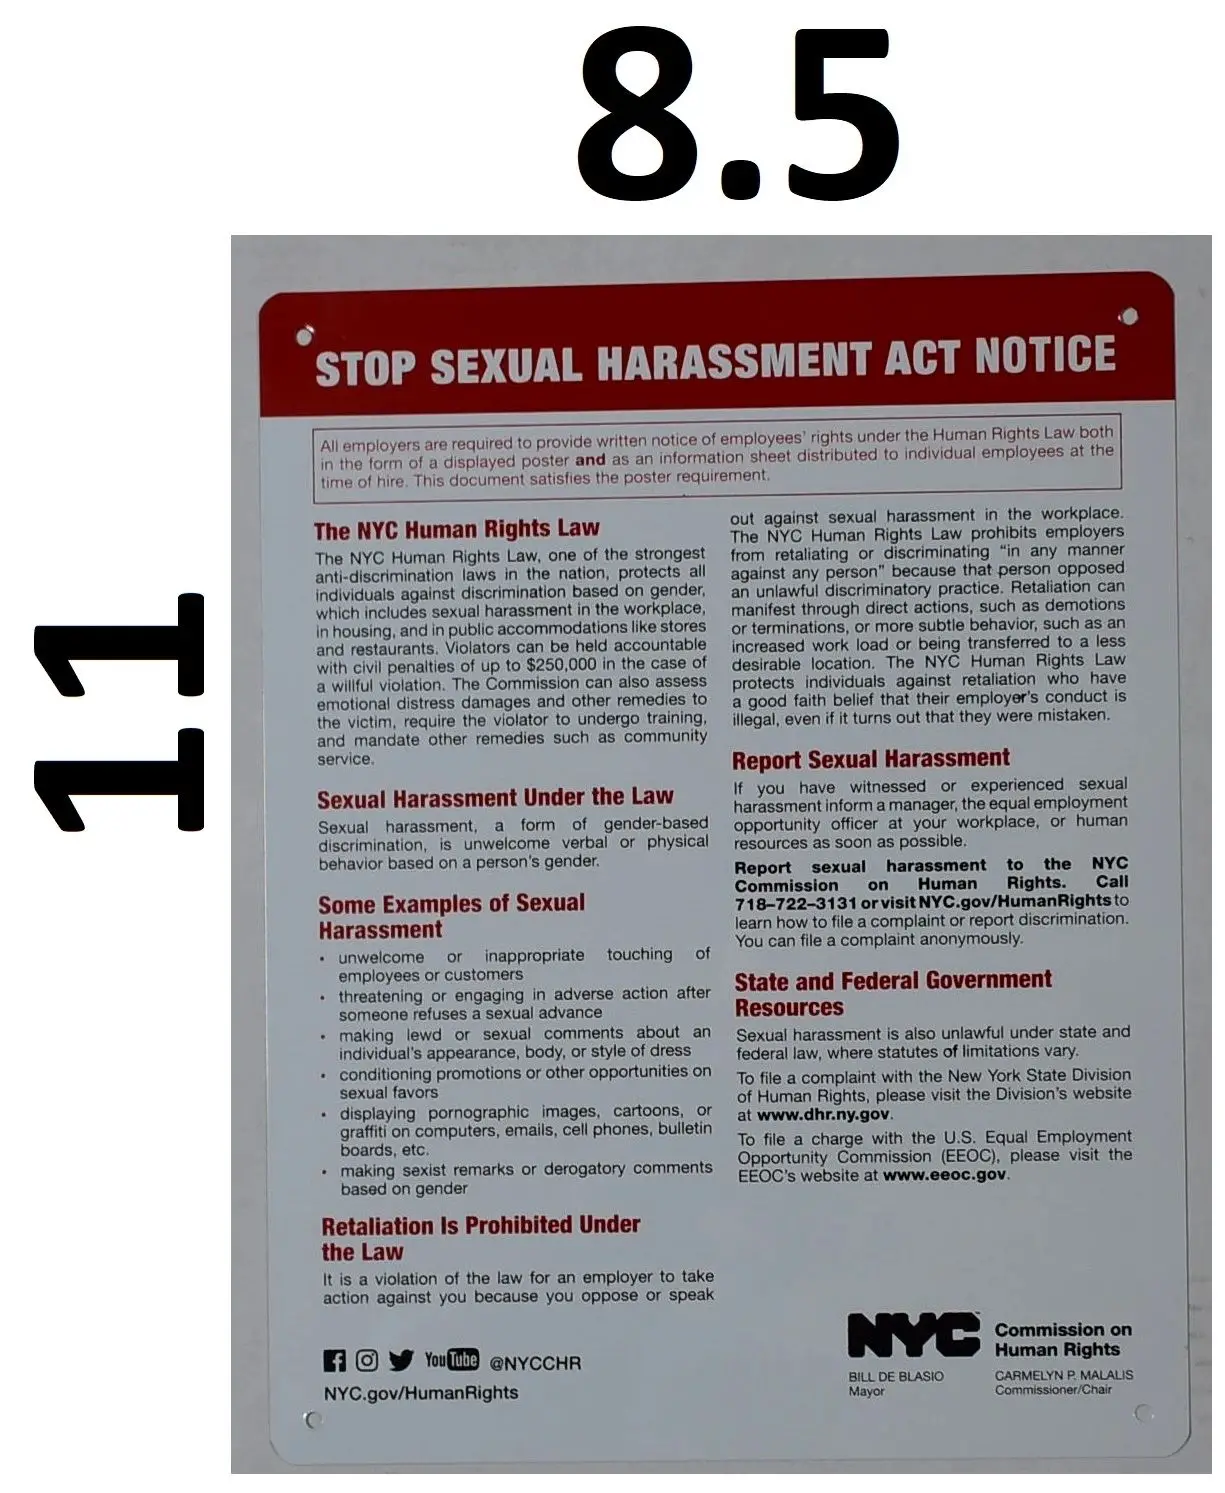 HPD SIGNS:STOP SEXUAL HARASSMENT ACT NOTICE SIGN (ALUMINUM SIGN)